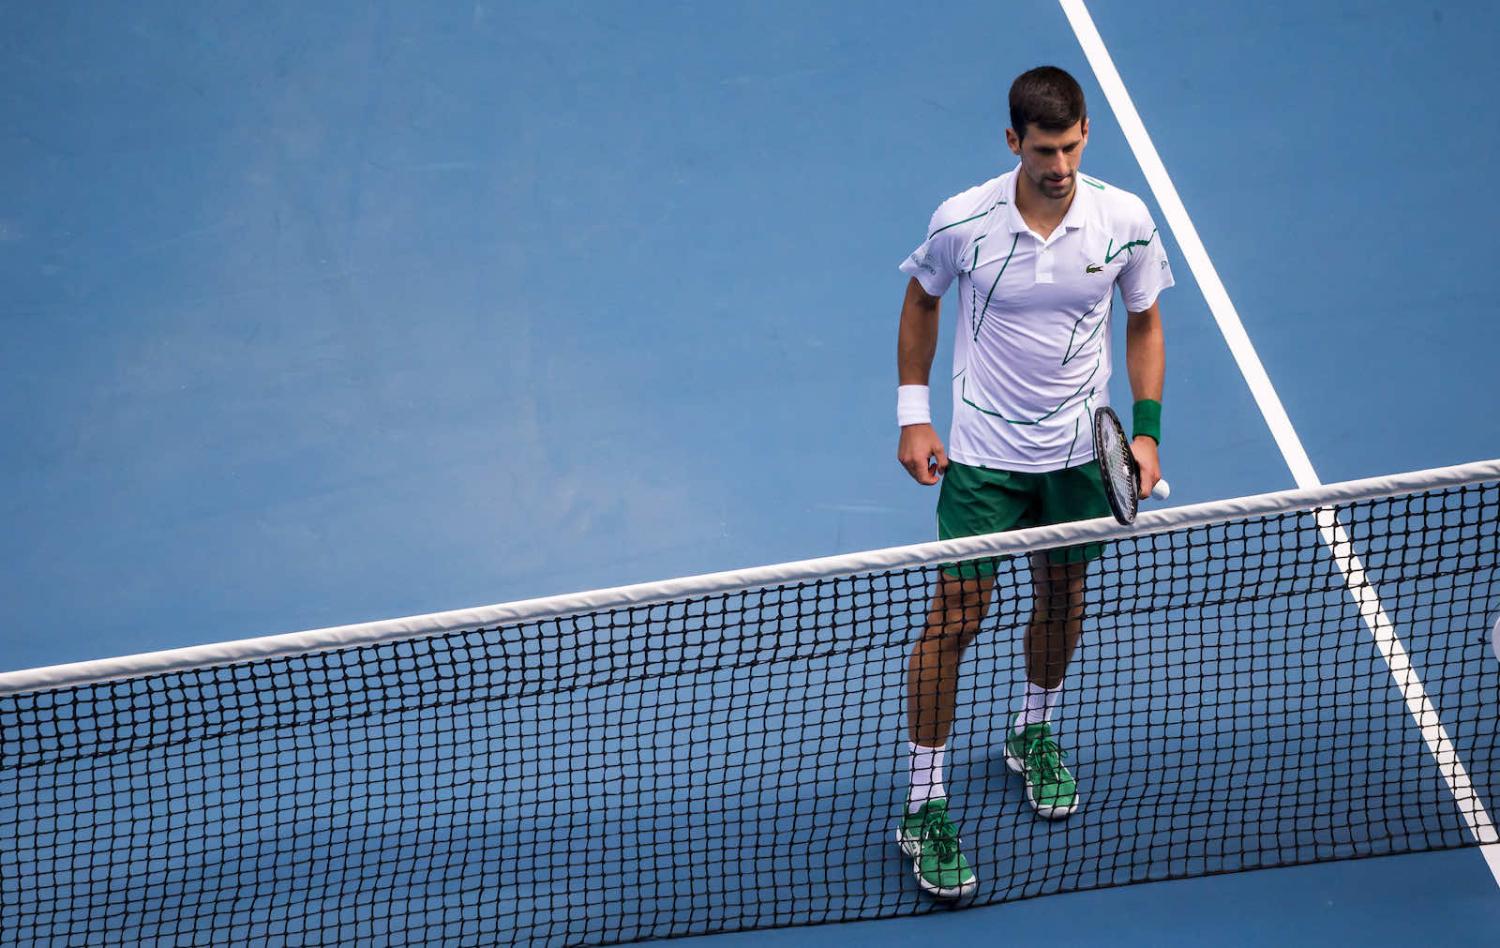 Novak Djokovic of Serbia during the fourth round of the 2020 Australian Open on January 26 2020 at Melbourne Park (Jason Heidrich/Icon Sportswire via Getty Images)